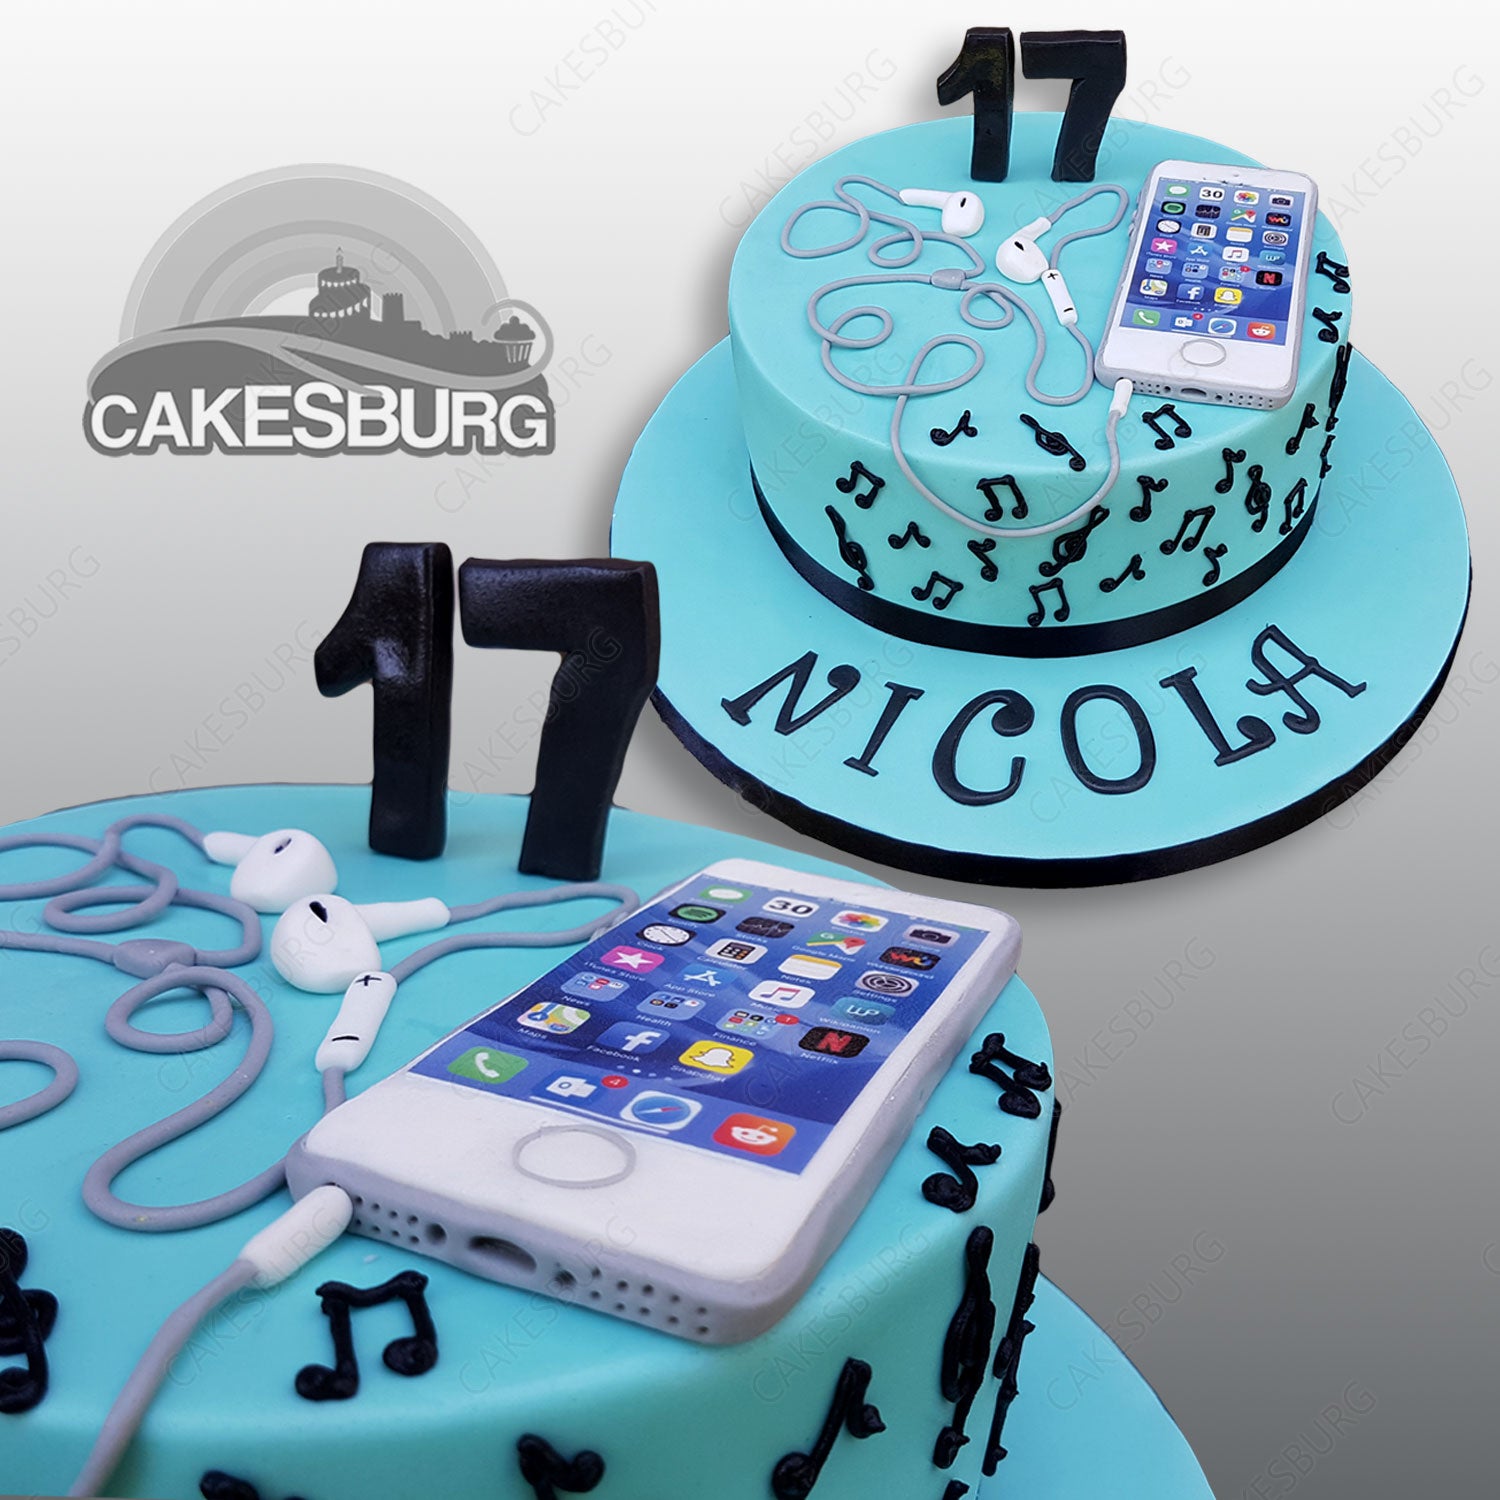 Assaf Frank Photography Licensing | Birthday cake with mobile phone on top